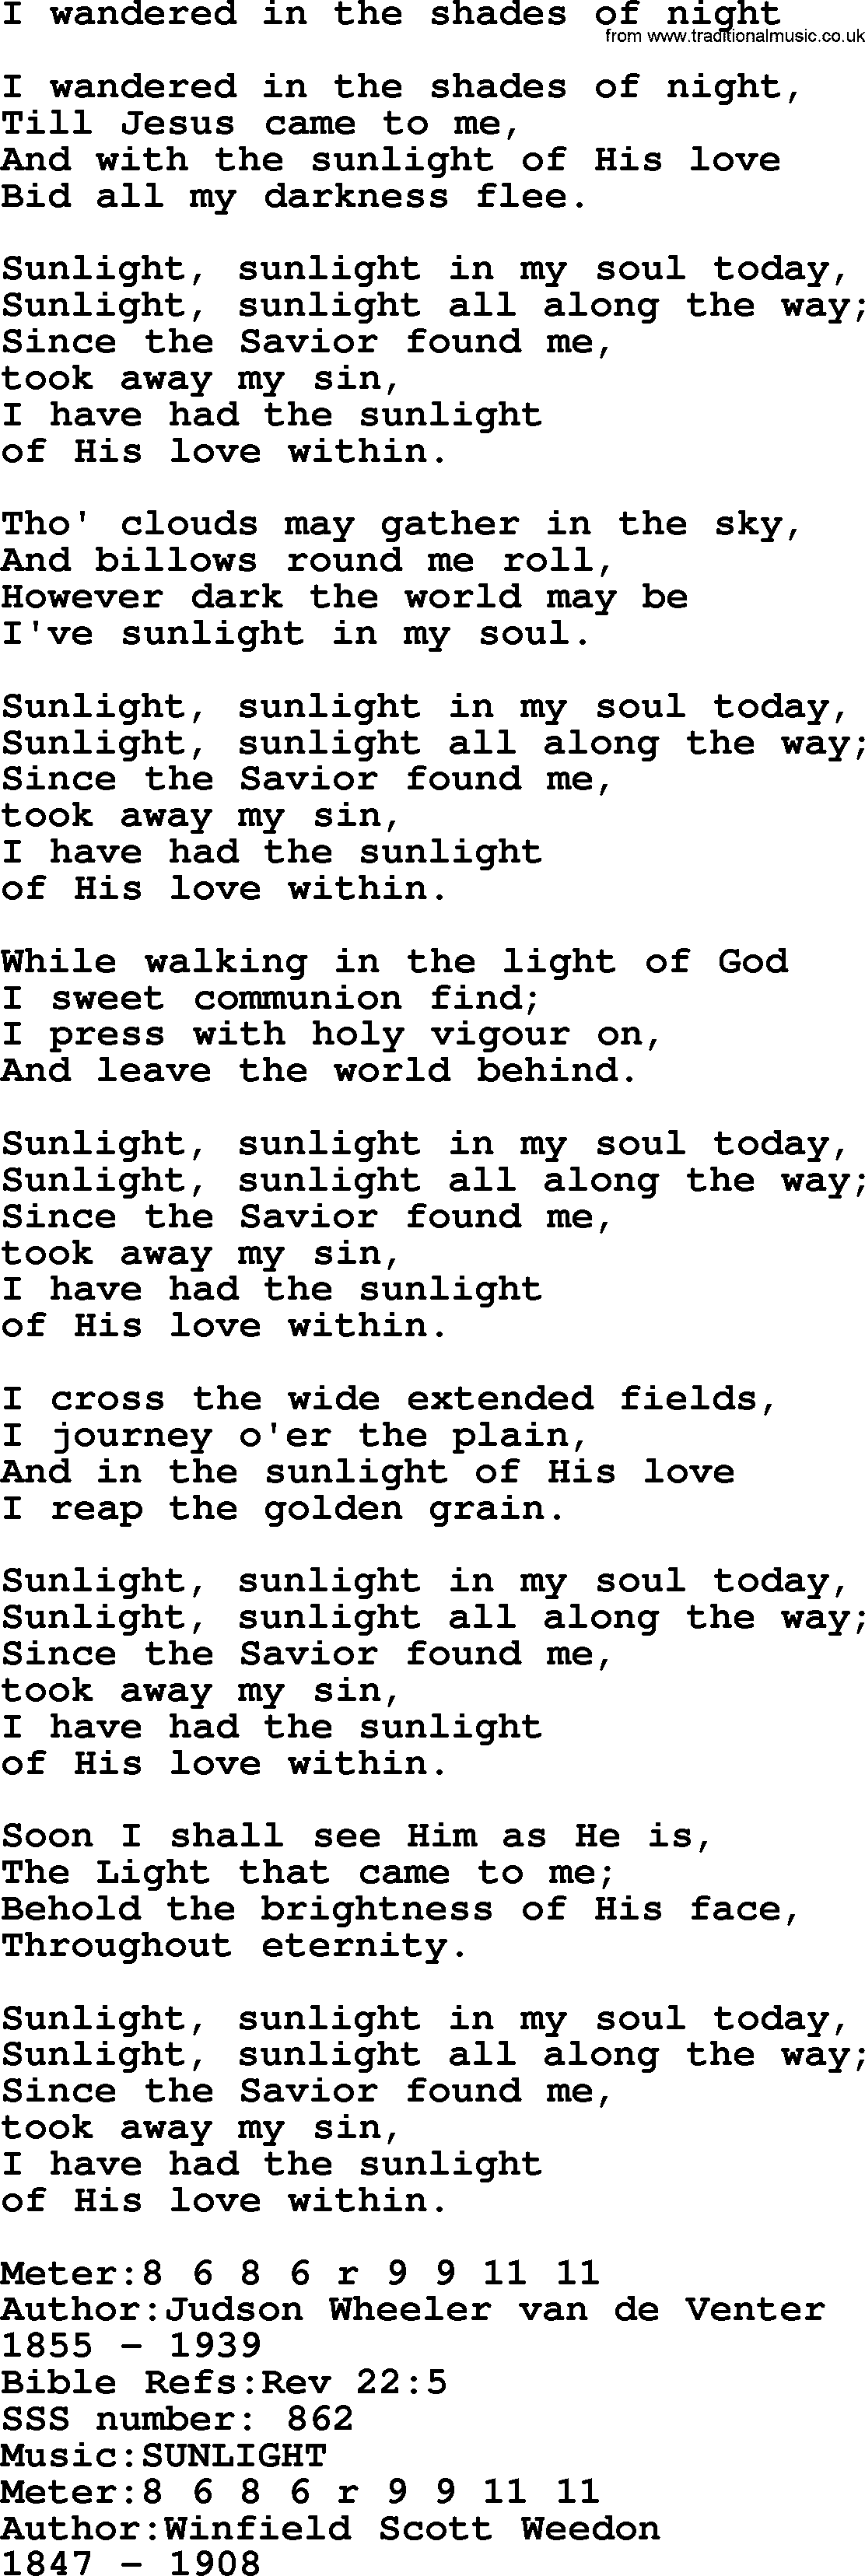 Sacred Songs and Solos complete, 1200 Hymns, title: I Wandered In The Shades Of Night, lyrics and PDF